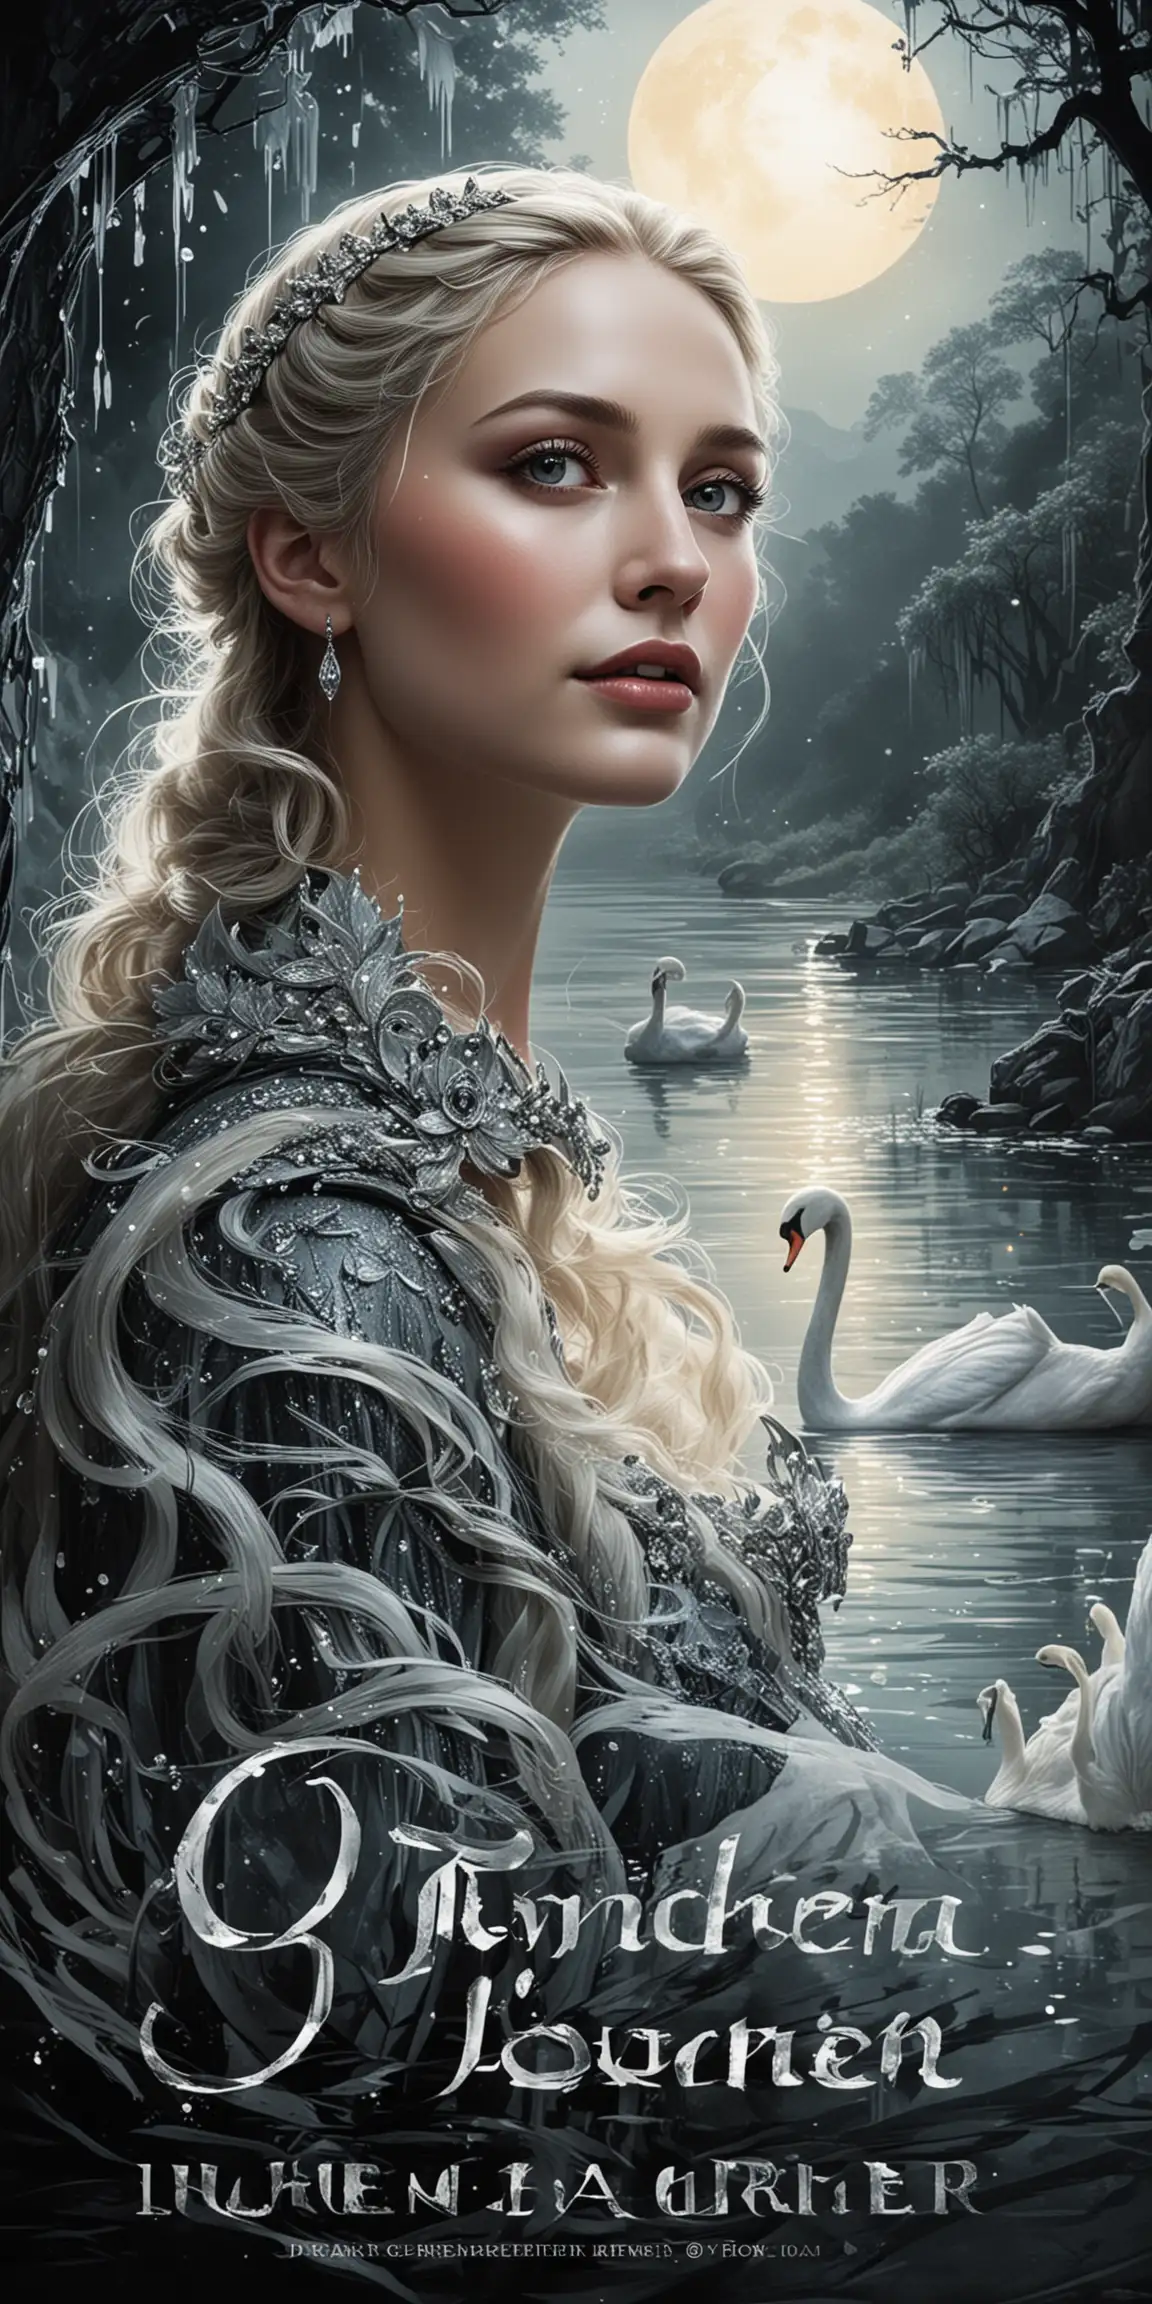 poster art for Richard Wagners Opera Lohengrin
containing the face of Elsa to the left looking into the frame bakground a sparkling river illustrated and a swan silhouette  